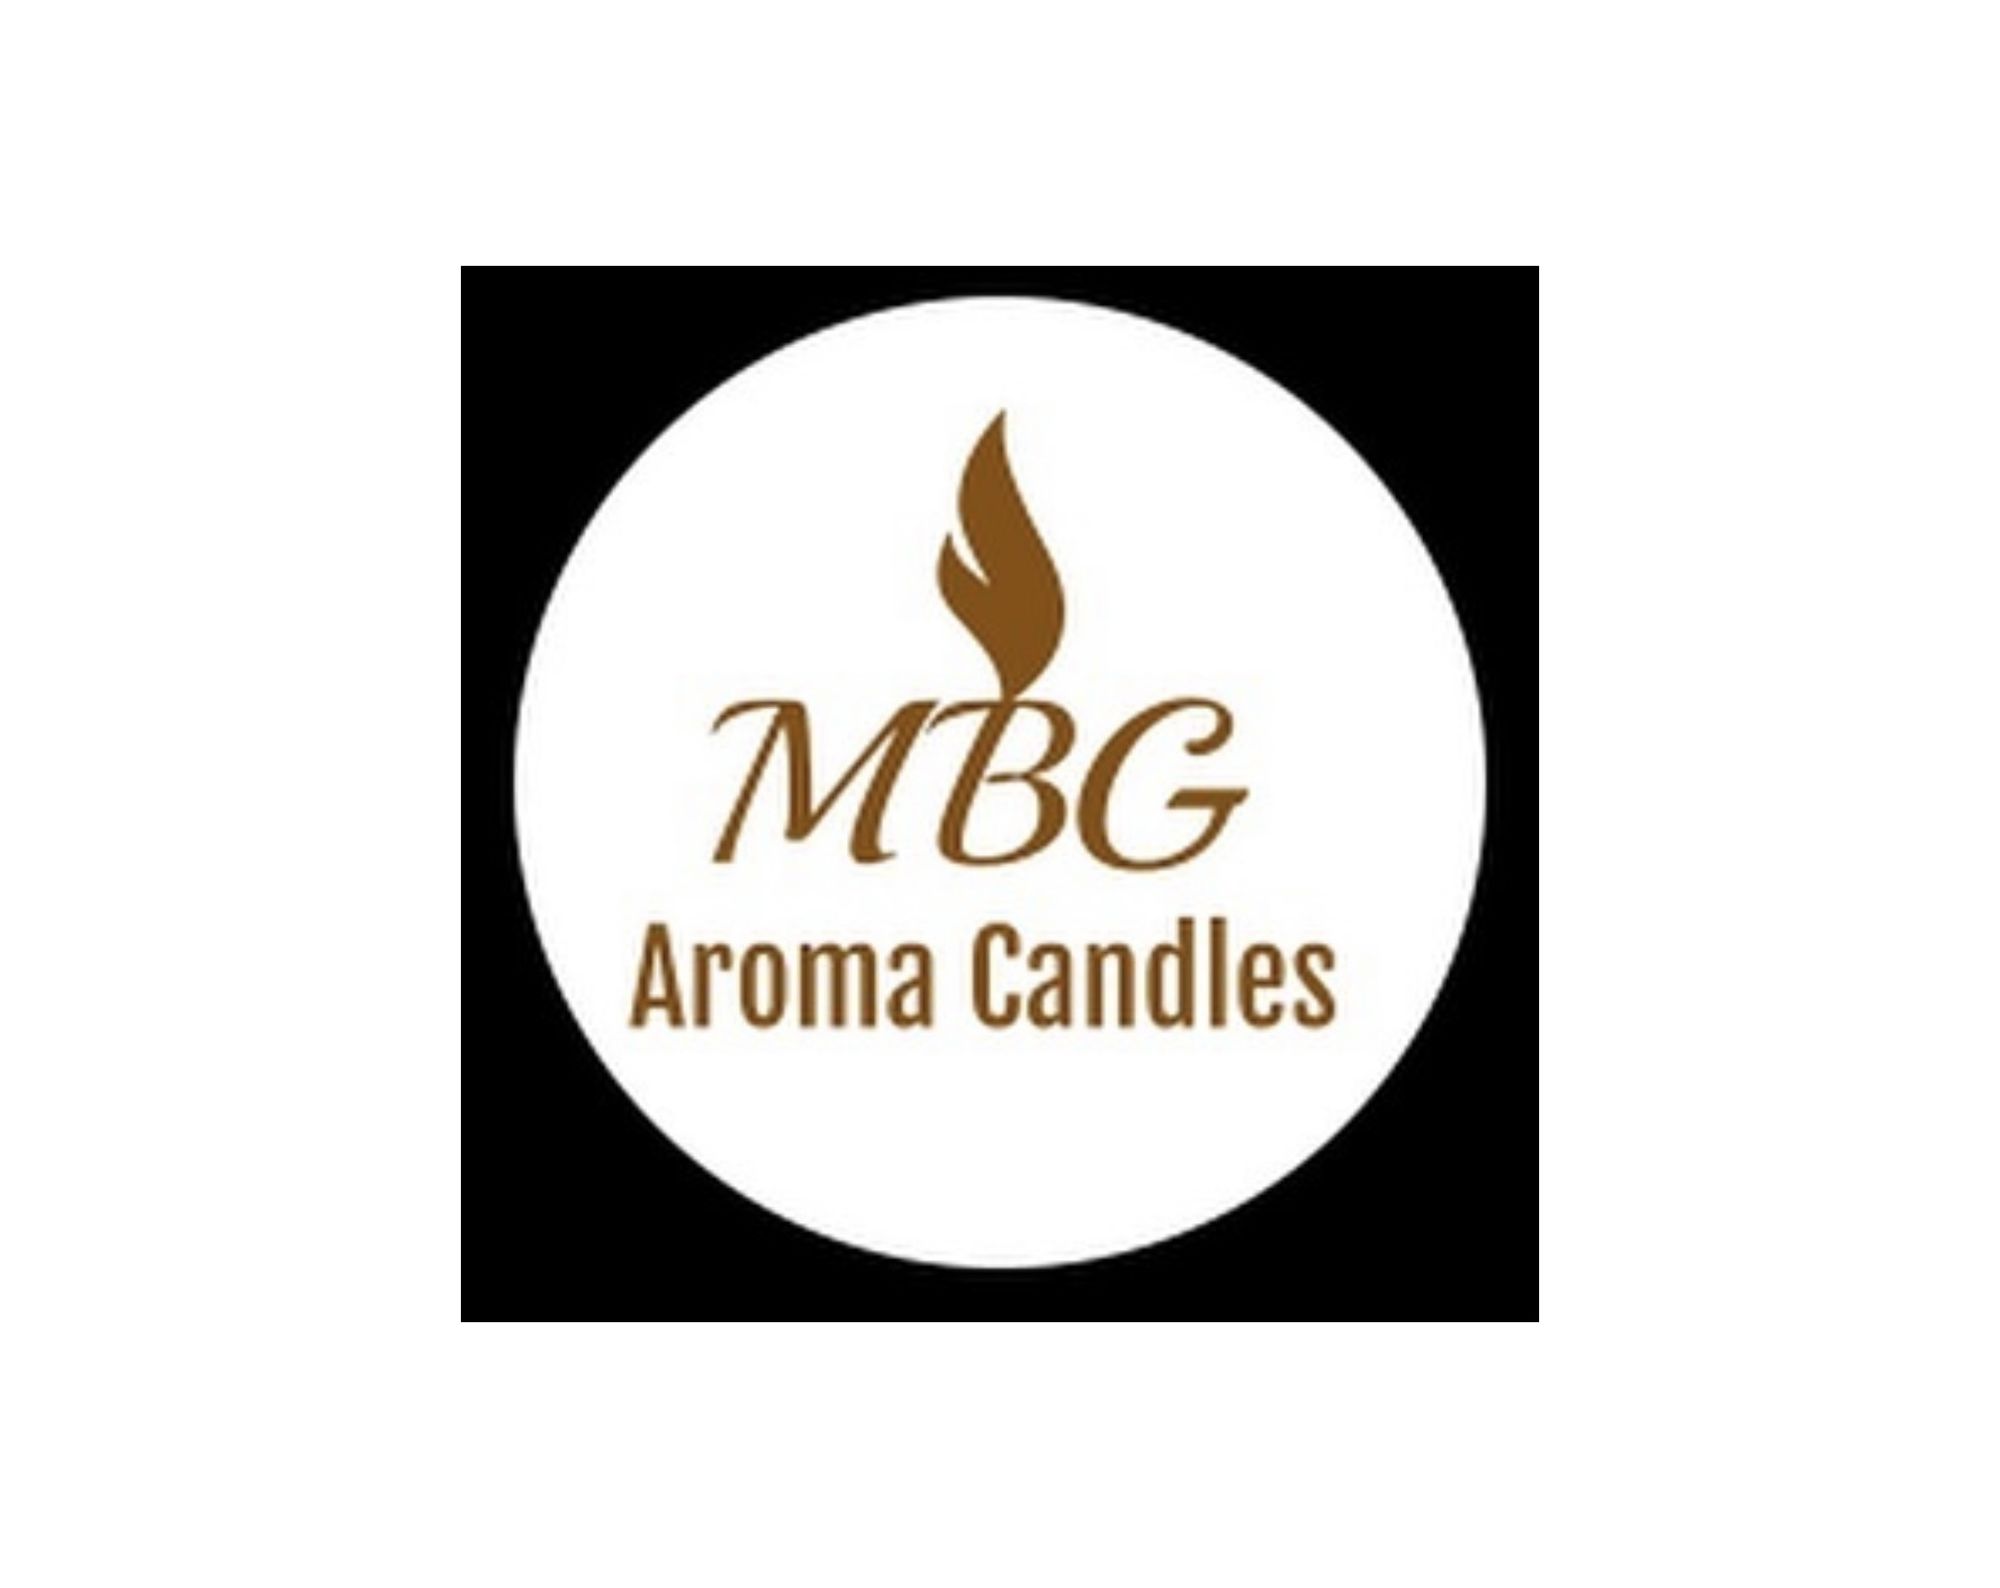 Cool Way to Wind Down - MBG Aroma Candles